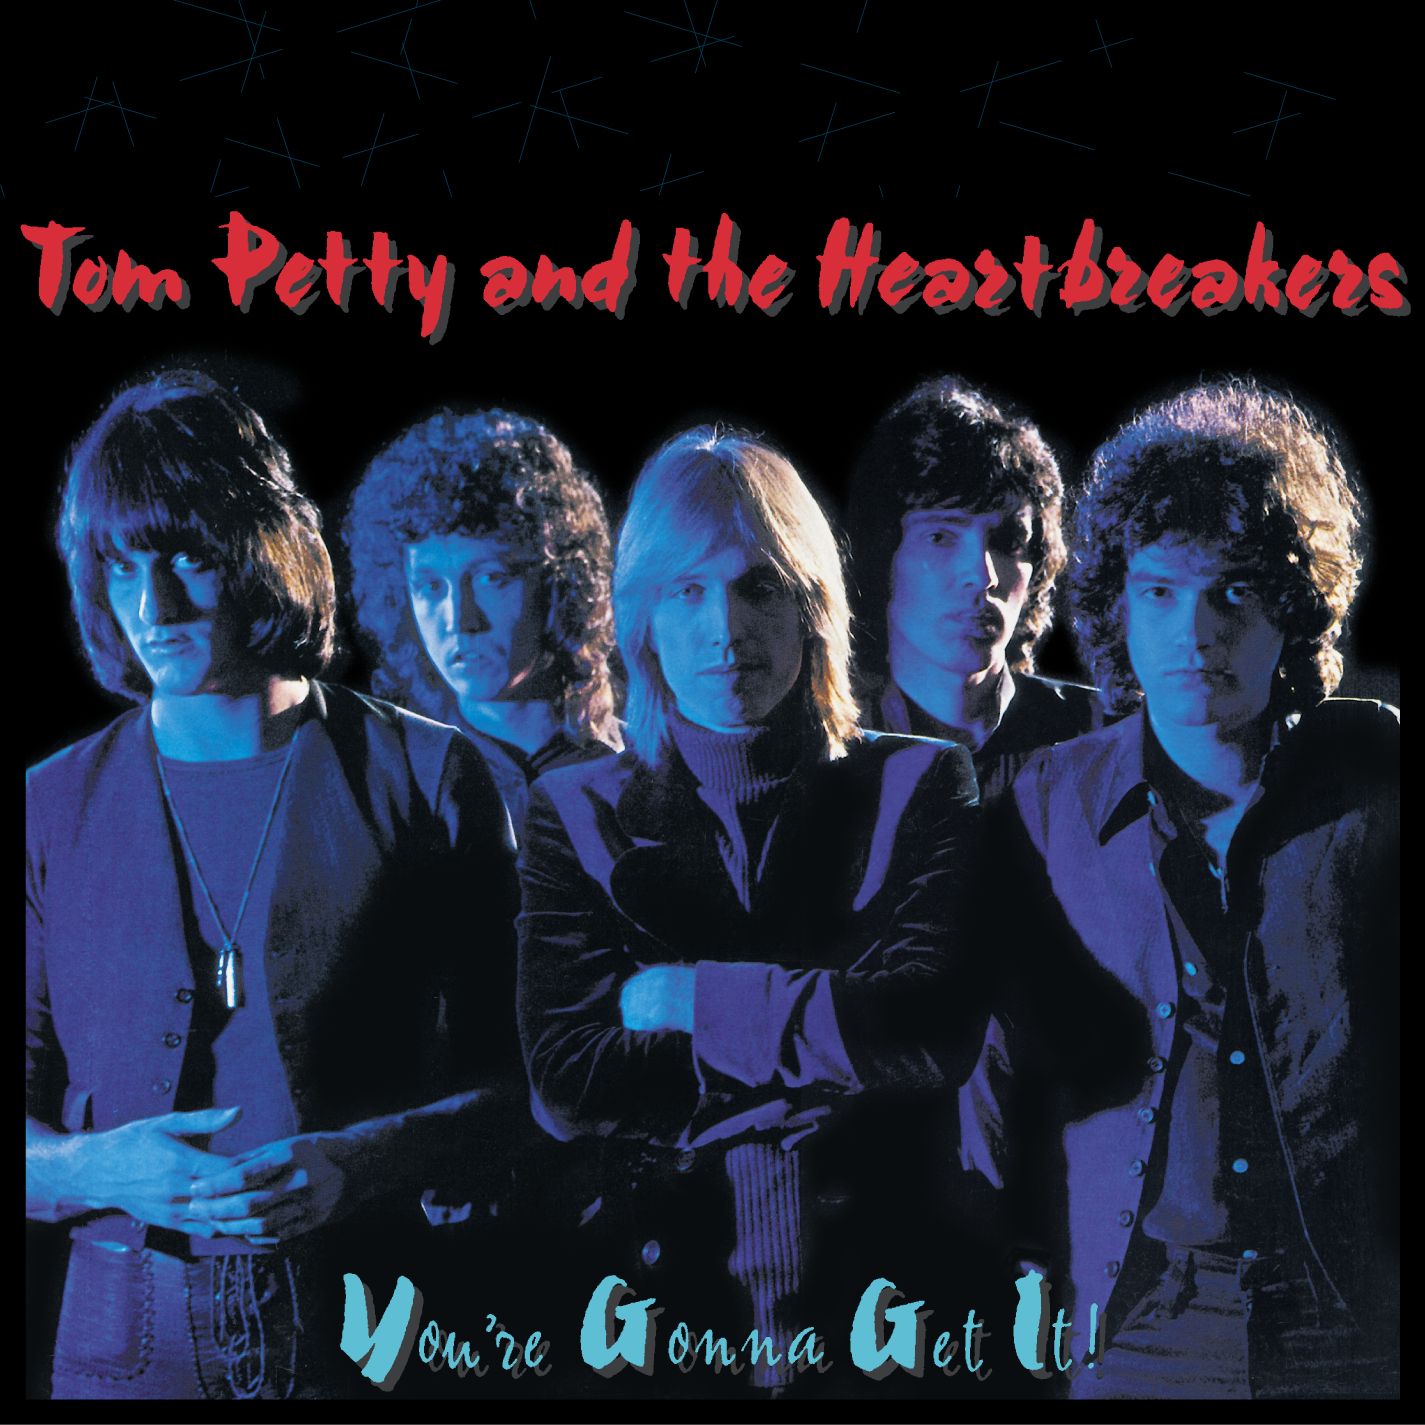 Tom Petty & The Heartbreakers - 1978 - You're Gonna Get It! [2015] 24-96